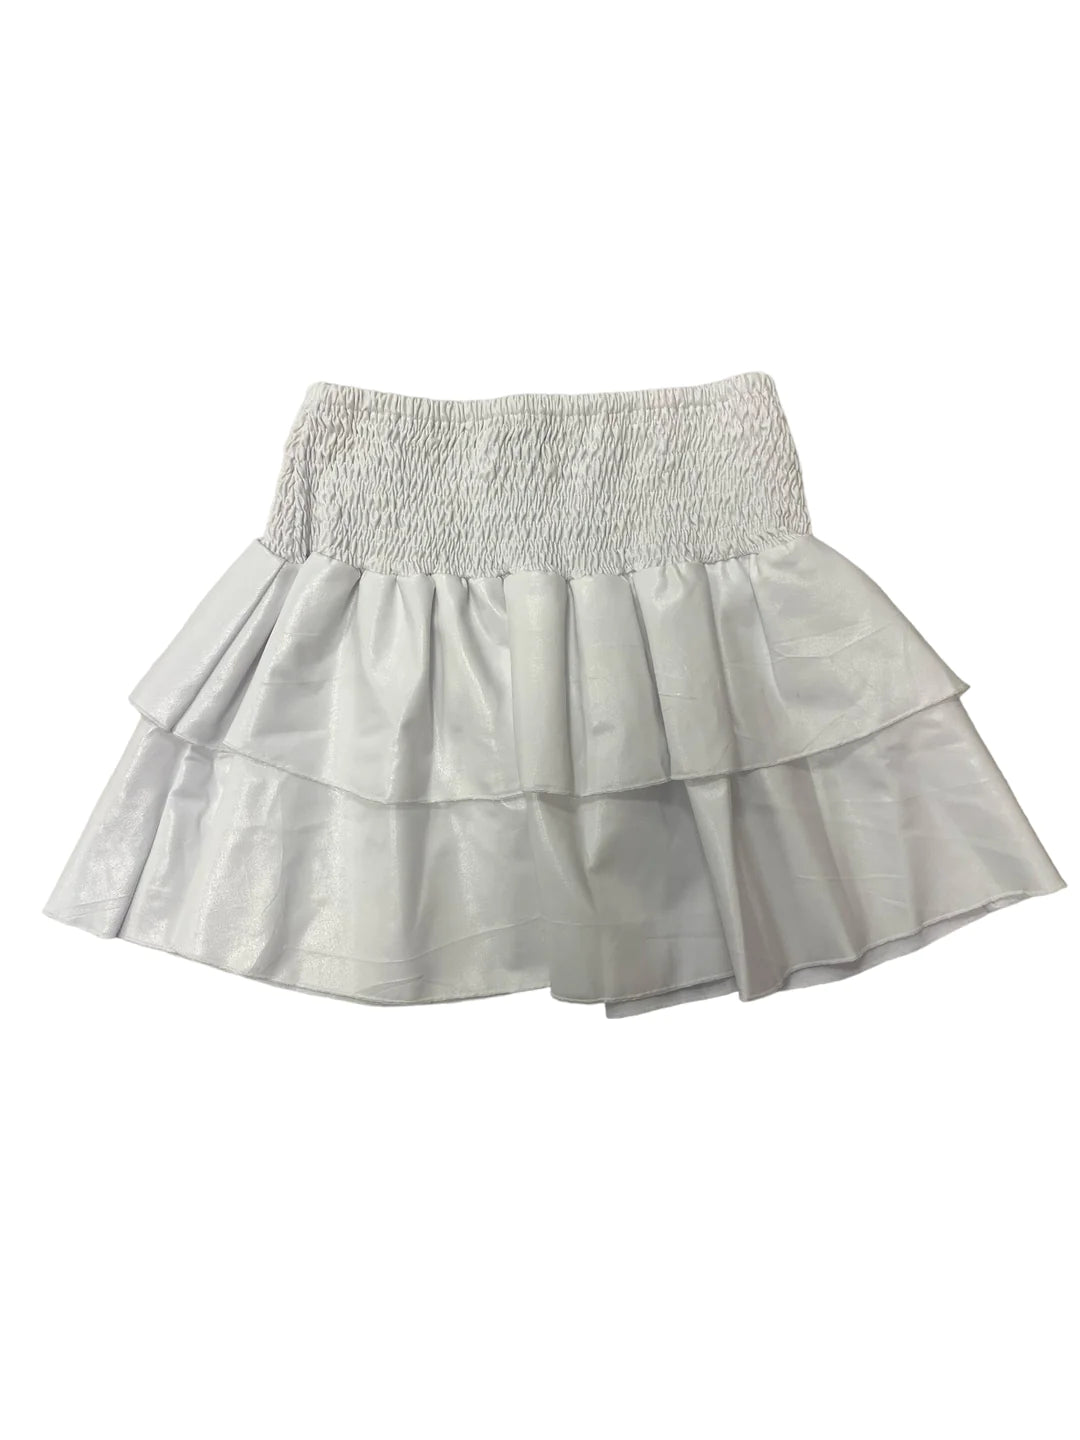 Flowers by Zoe White Tier Pleather Skirt